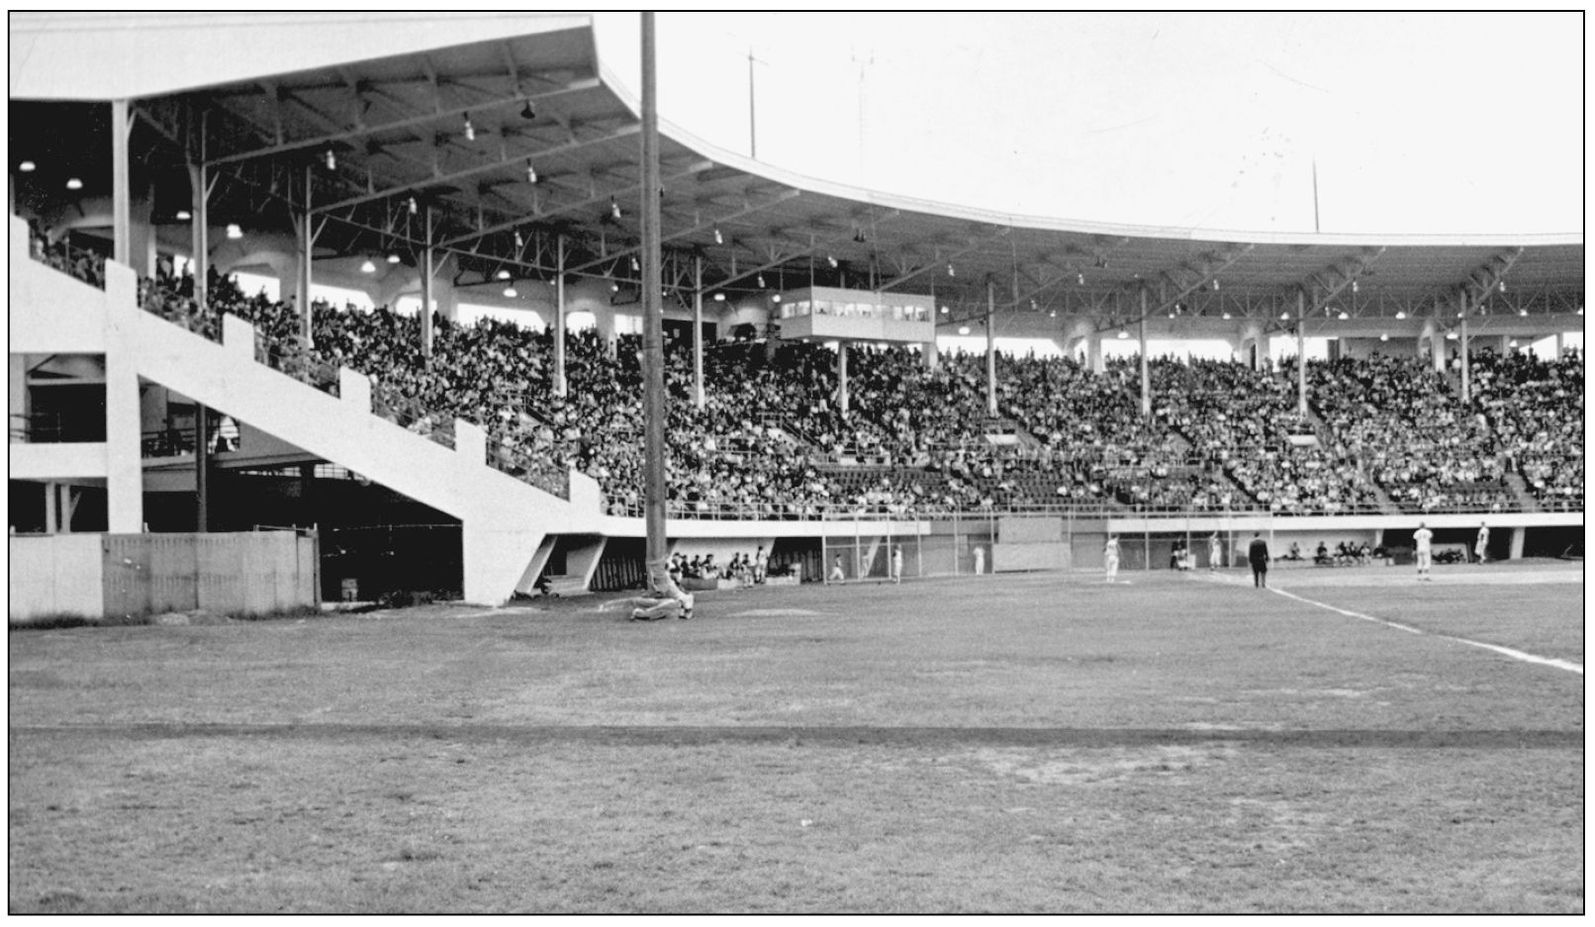 A full house packs McCoy to take in a Pawtucket Indians game on July 1 1967 - photo 9